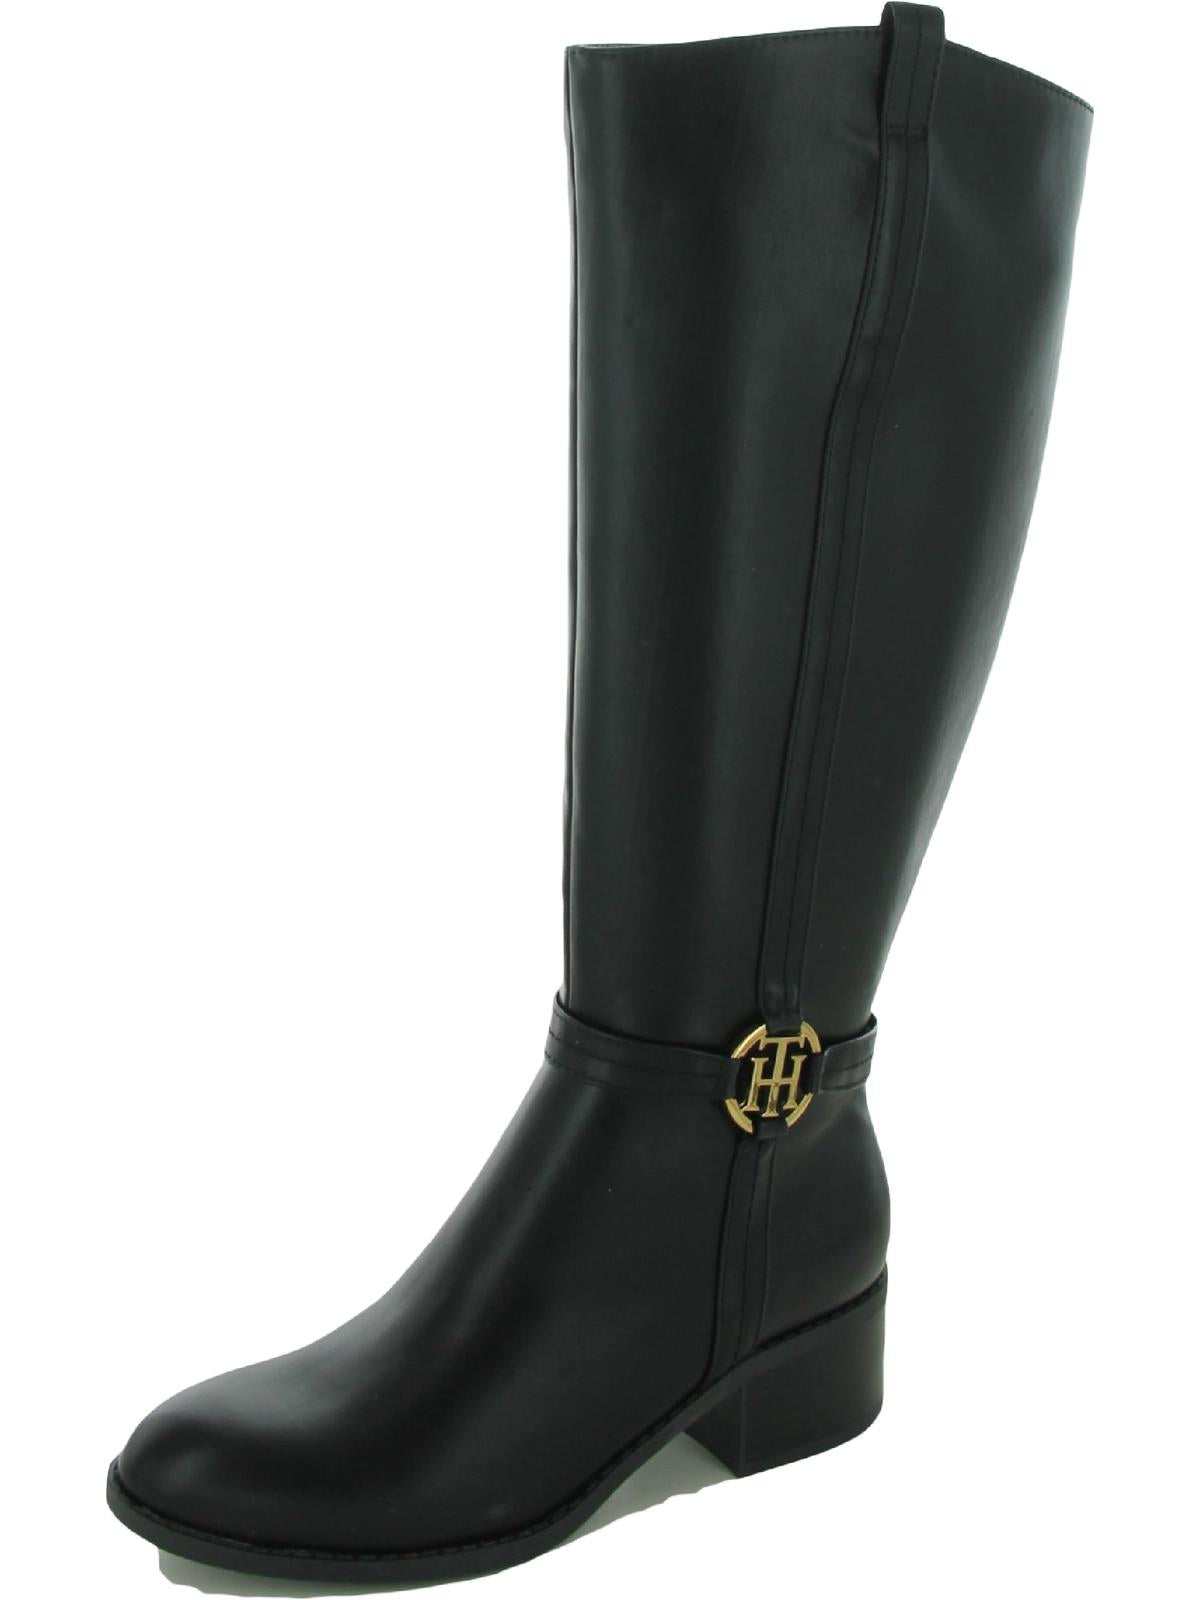 TOMMY HILFIGER Diwan Womens Wide Calf Faux Leather Knee-High Boots